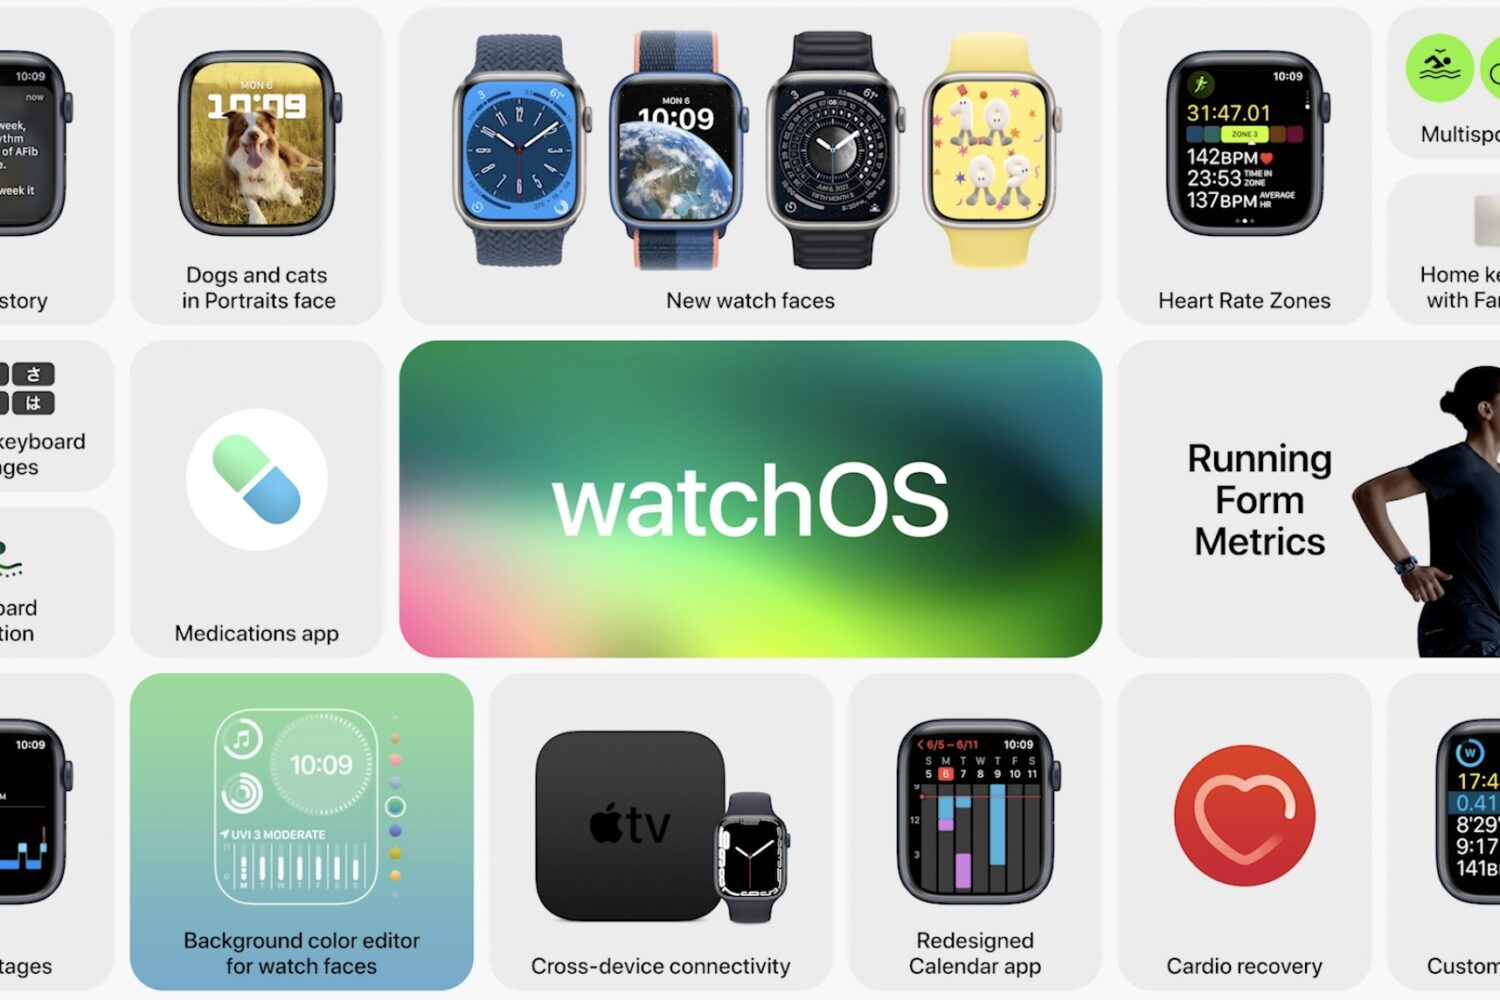 Apple's marketing image listing some of the best new Apple Watch features in the watchOS 9 update